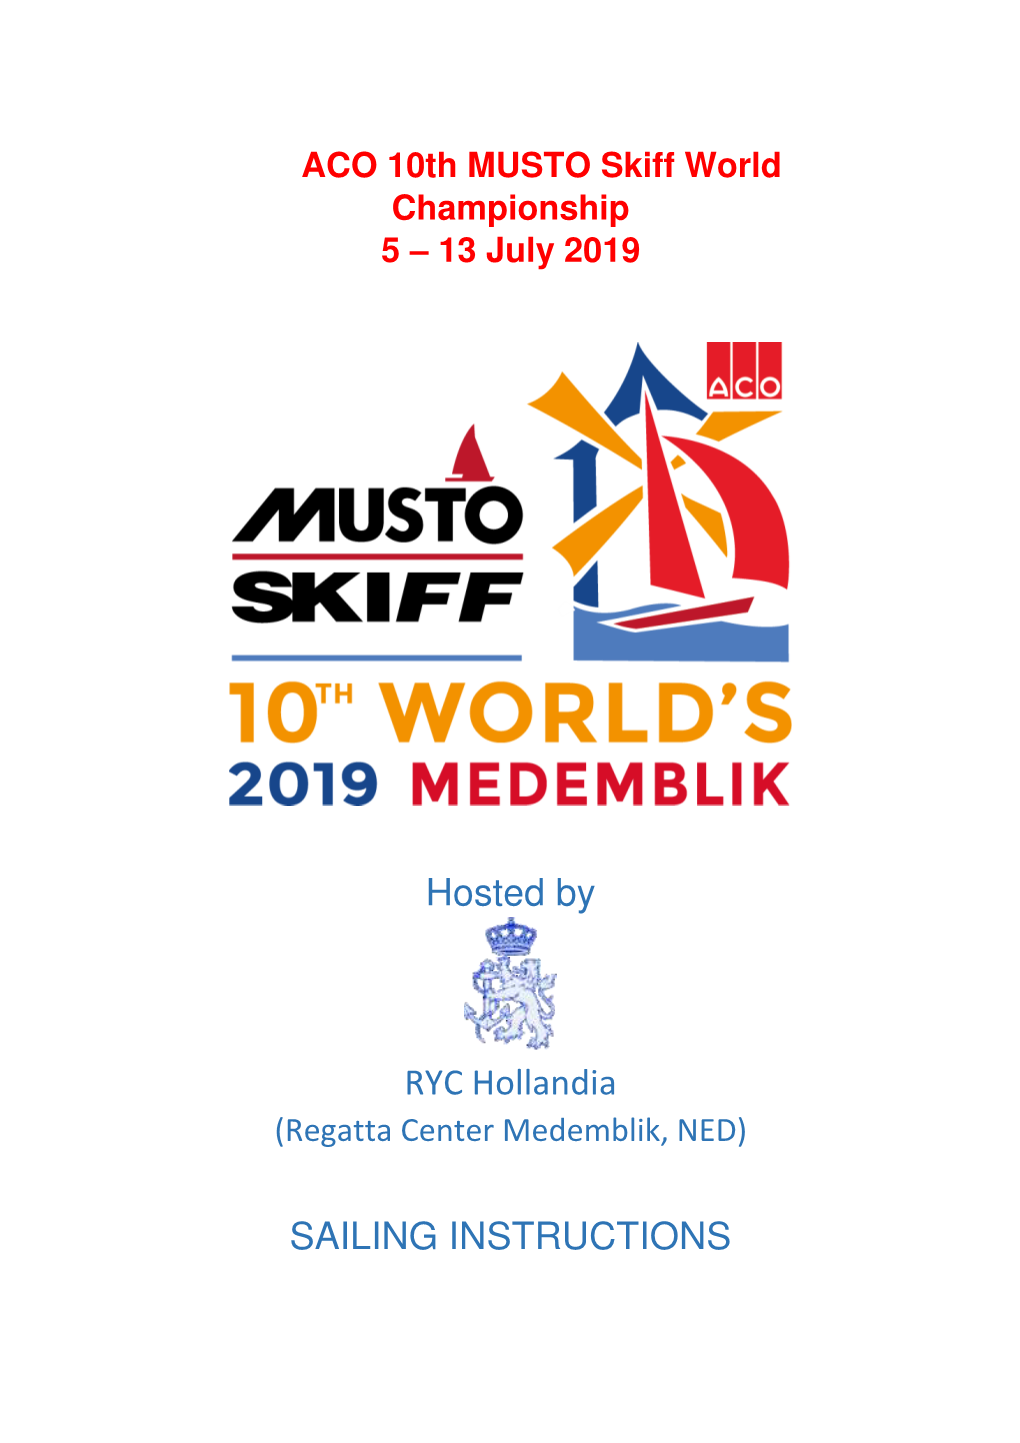 Hosted by RYC Hollandia SAILING INSTRUCTIONS